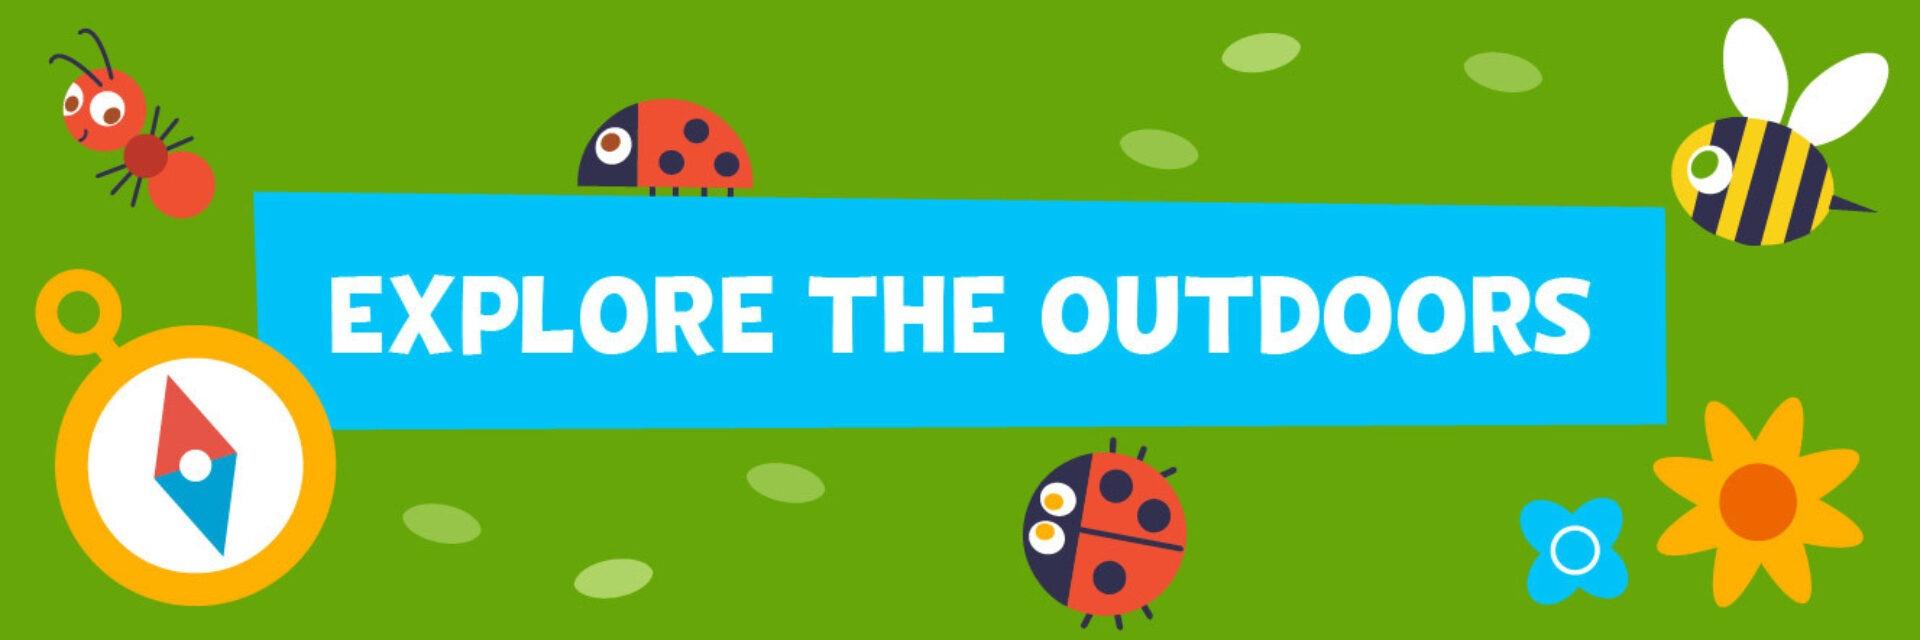 Explore the Outdoors graphic - the graphic has a compass, ant, two ladybugs, a bee, and two flowers around a sign that says Explore the Outdoors.  